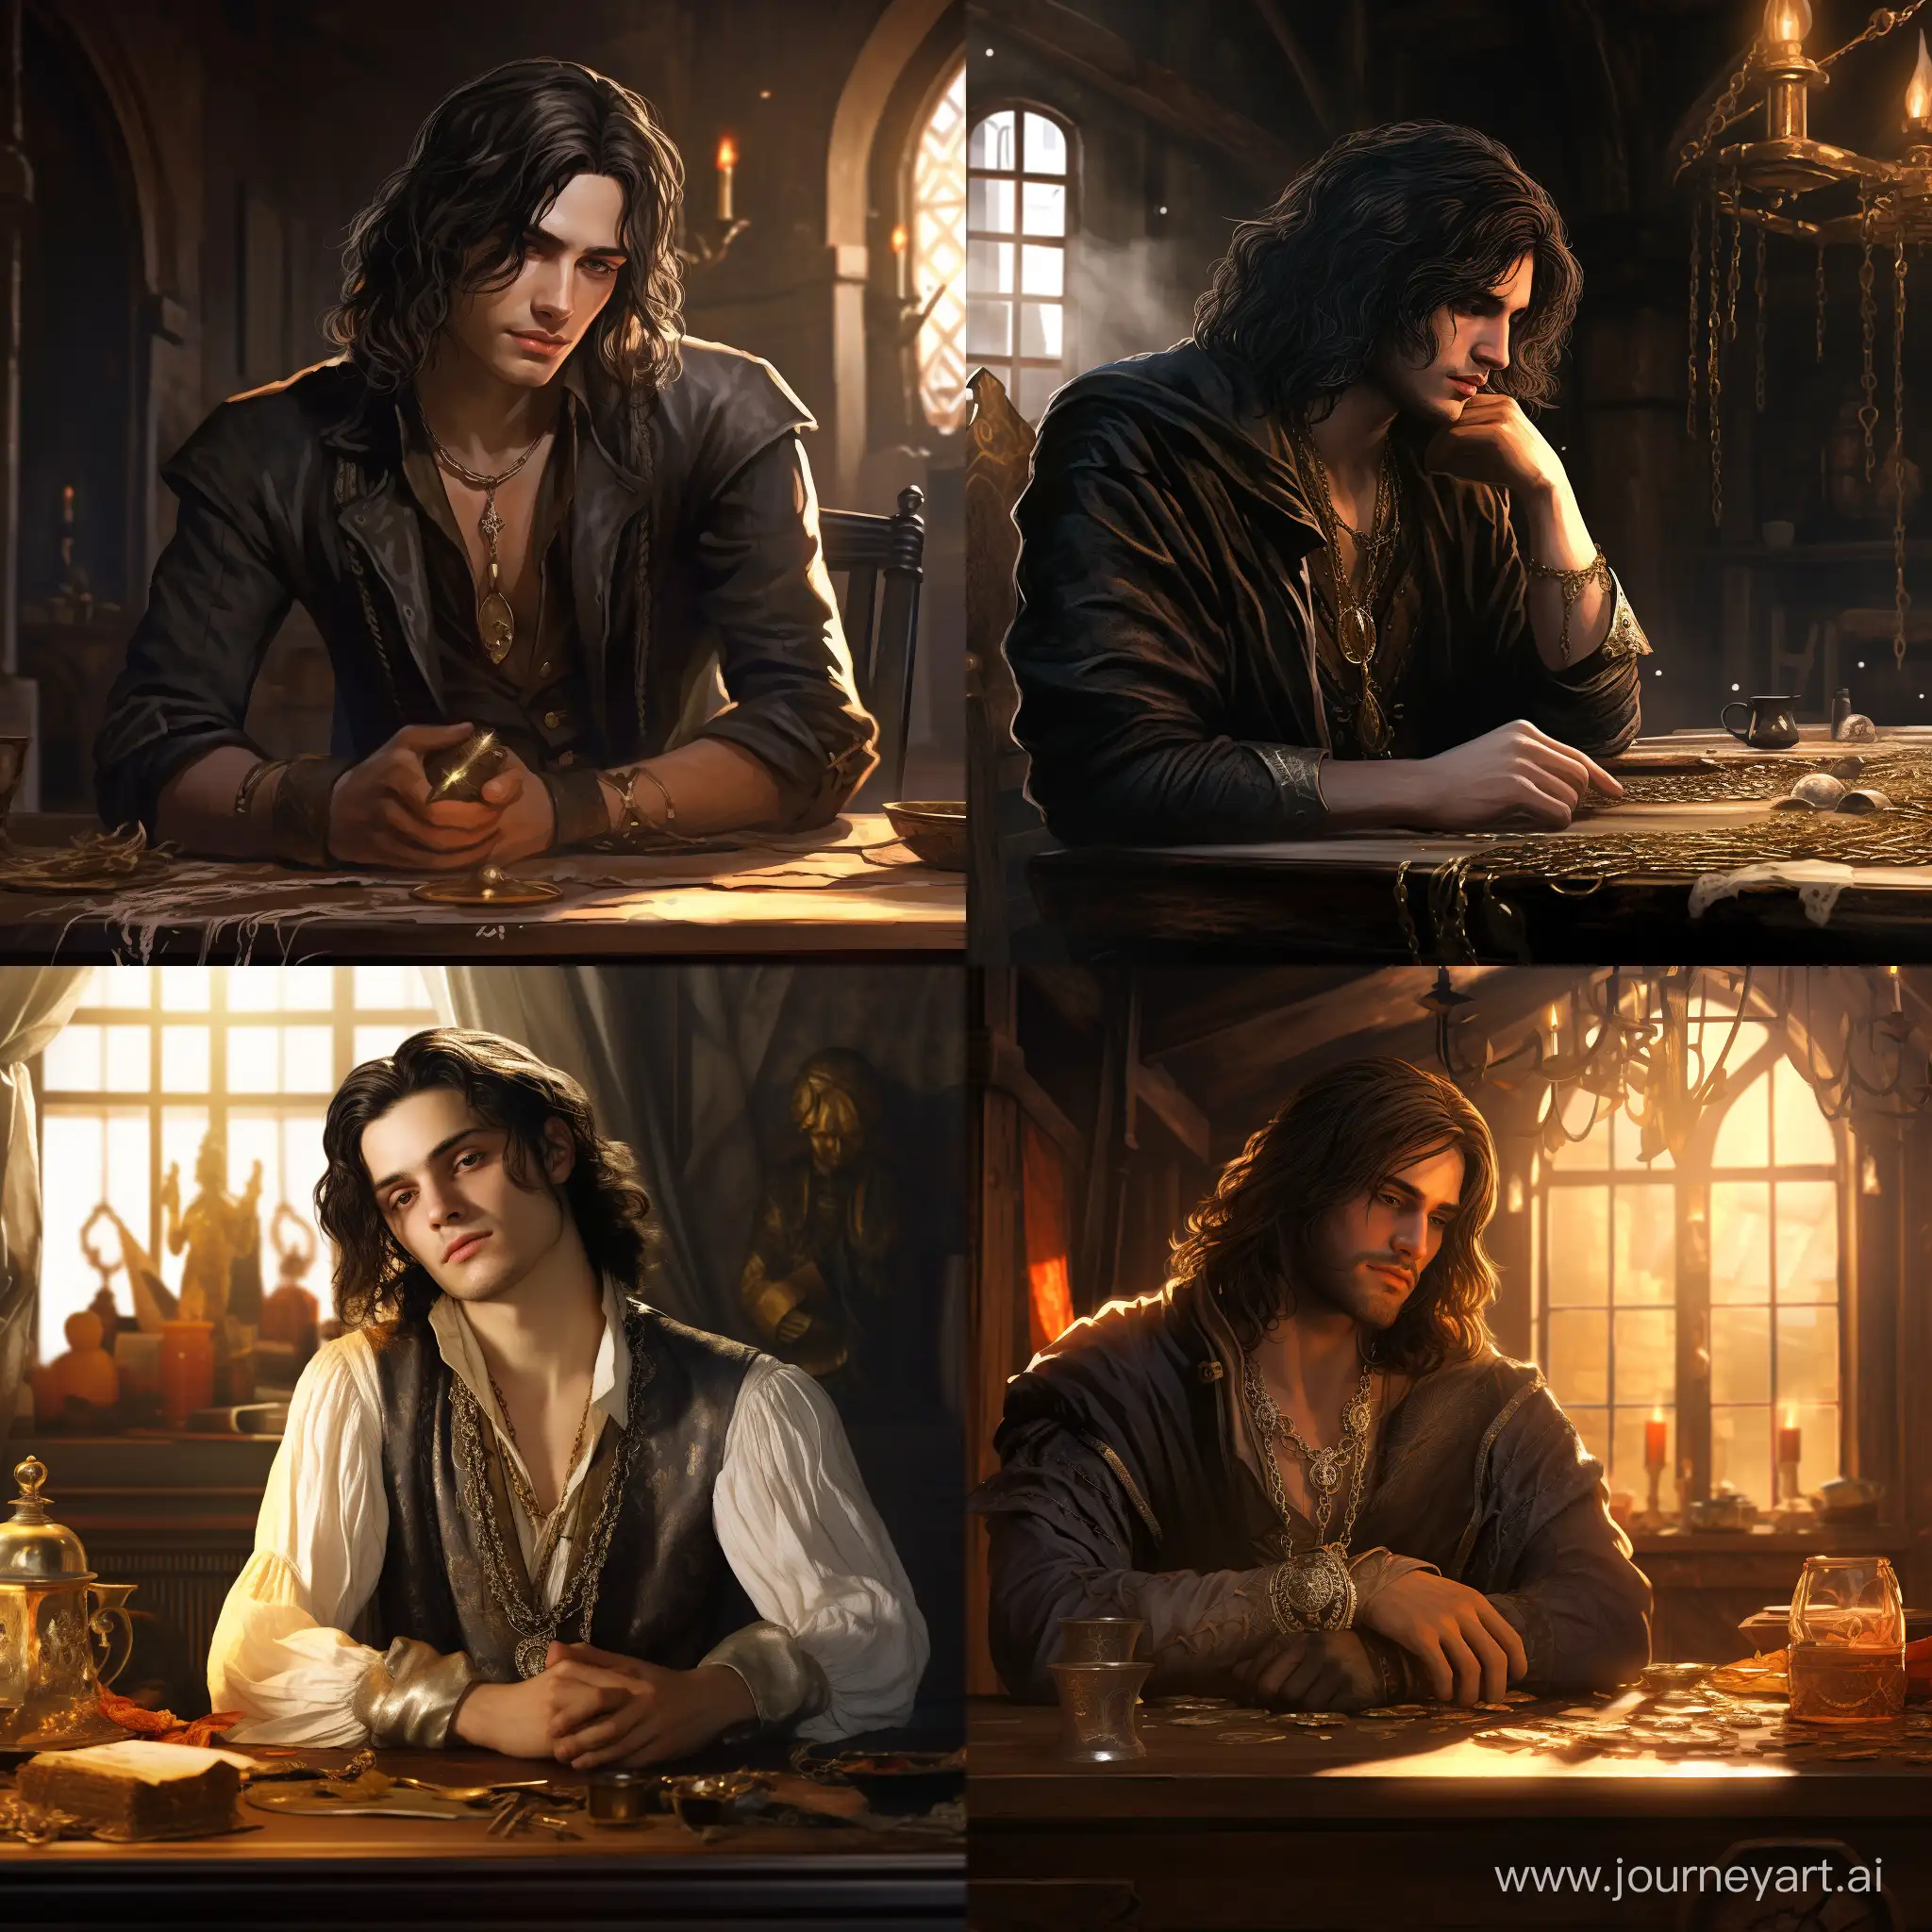 22-year-old son of the governor of the province, wrinkles on his face, long black hair, no beard, a crystal emitting bright light from the inside, suspended on a gold chain, sitting on a chair at the table, medieval meeting room, lotr, 4k, fantasy, concept art, full hd